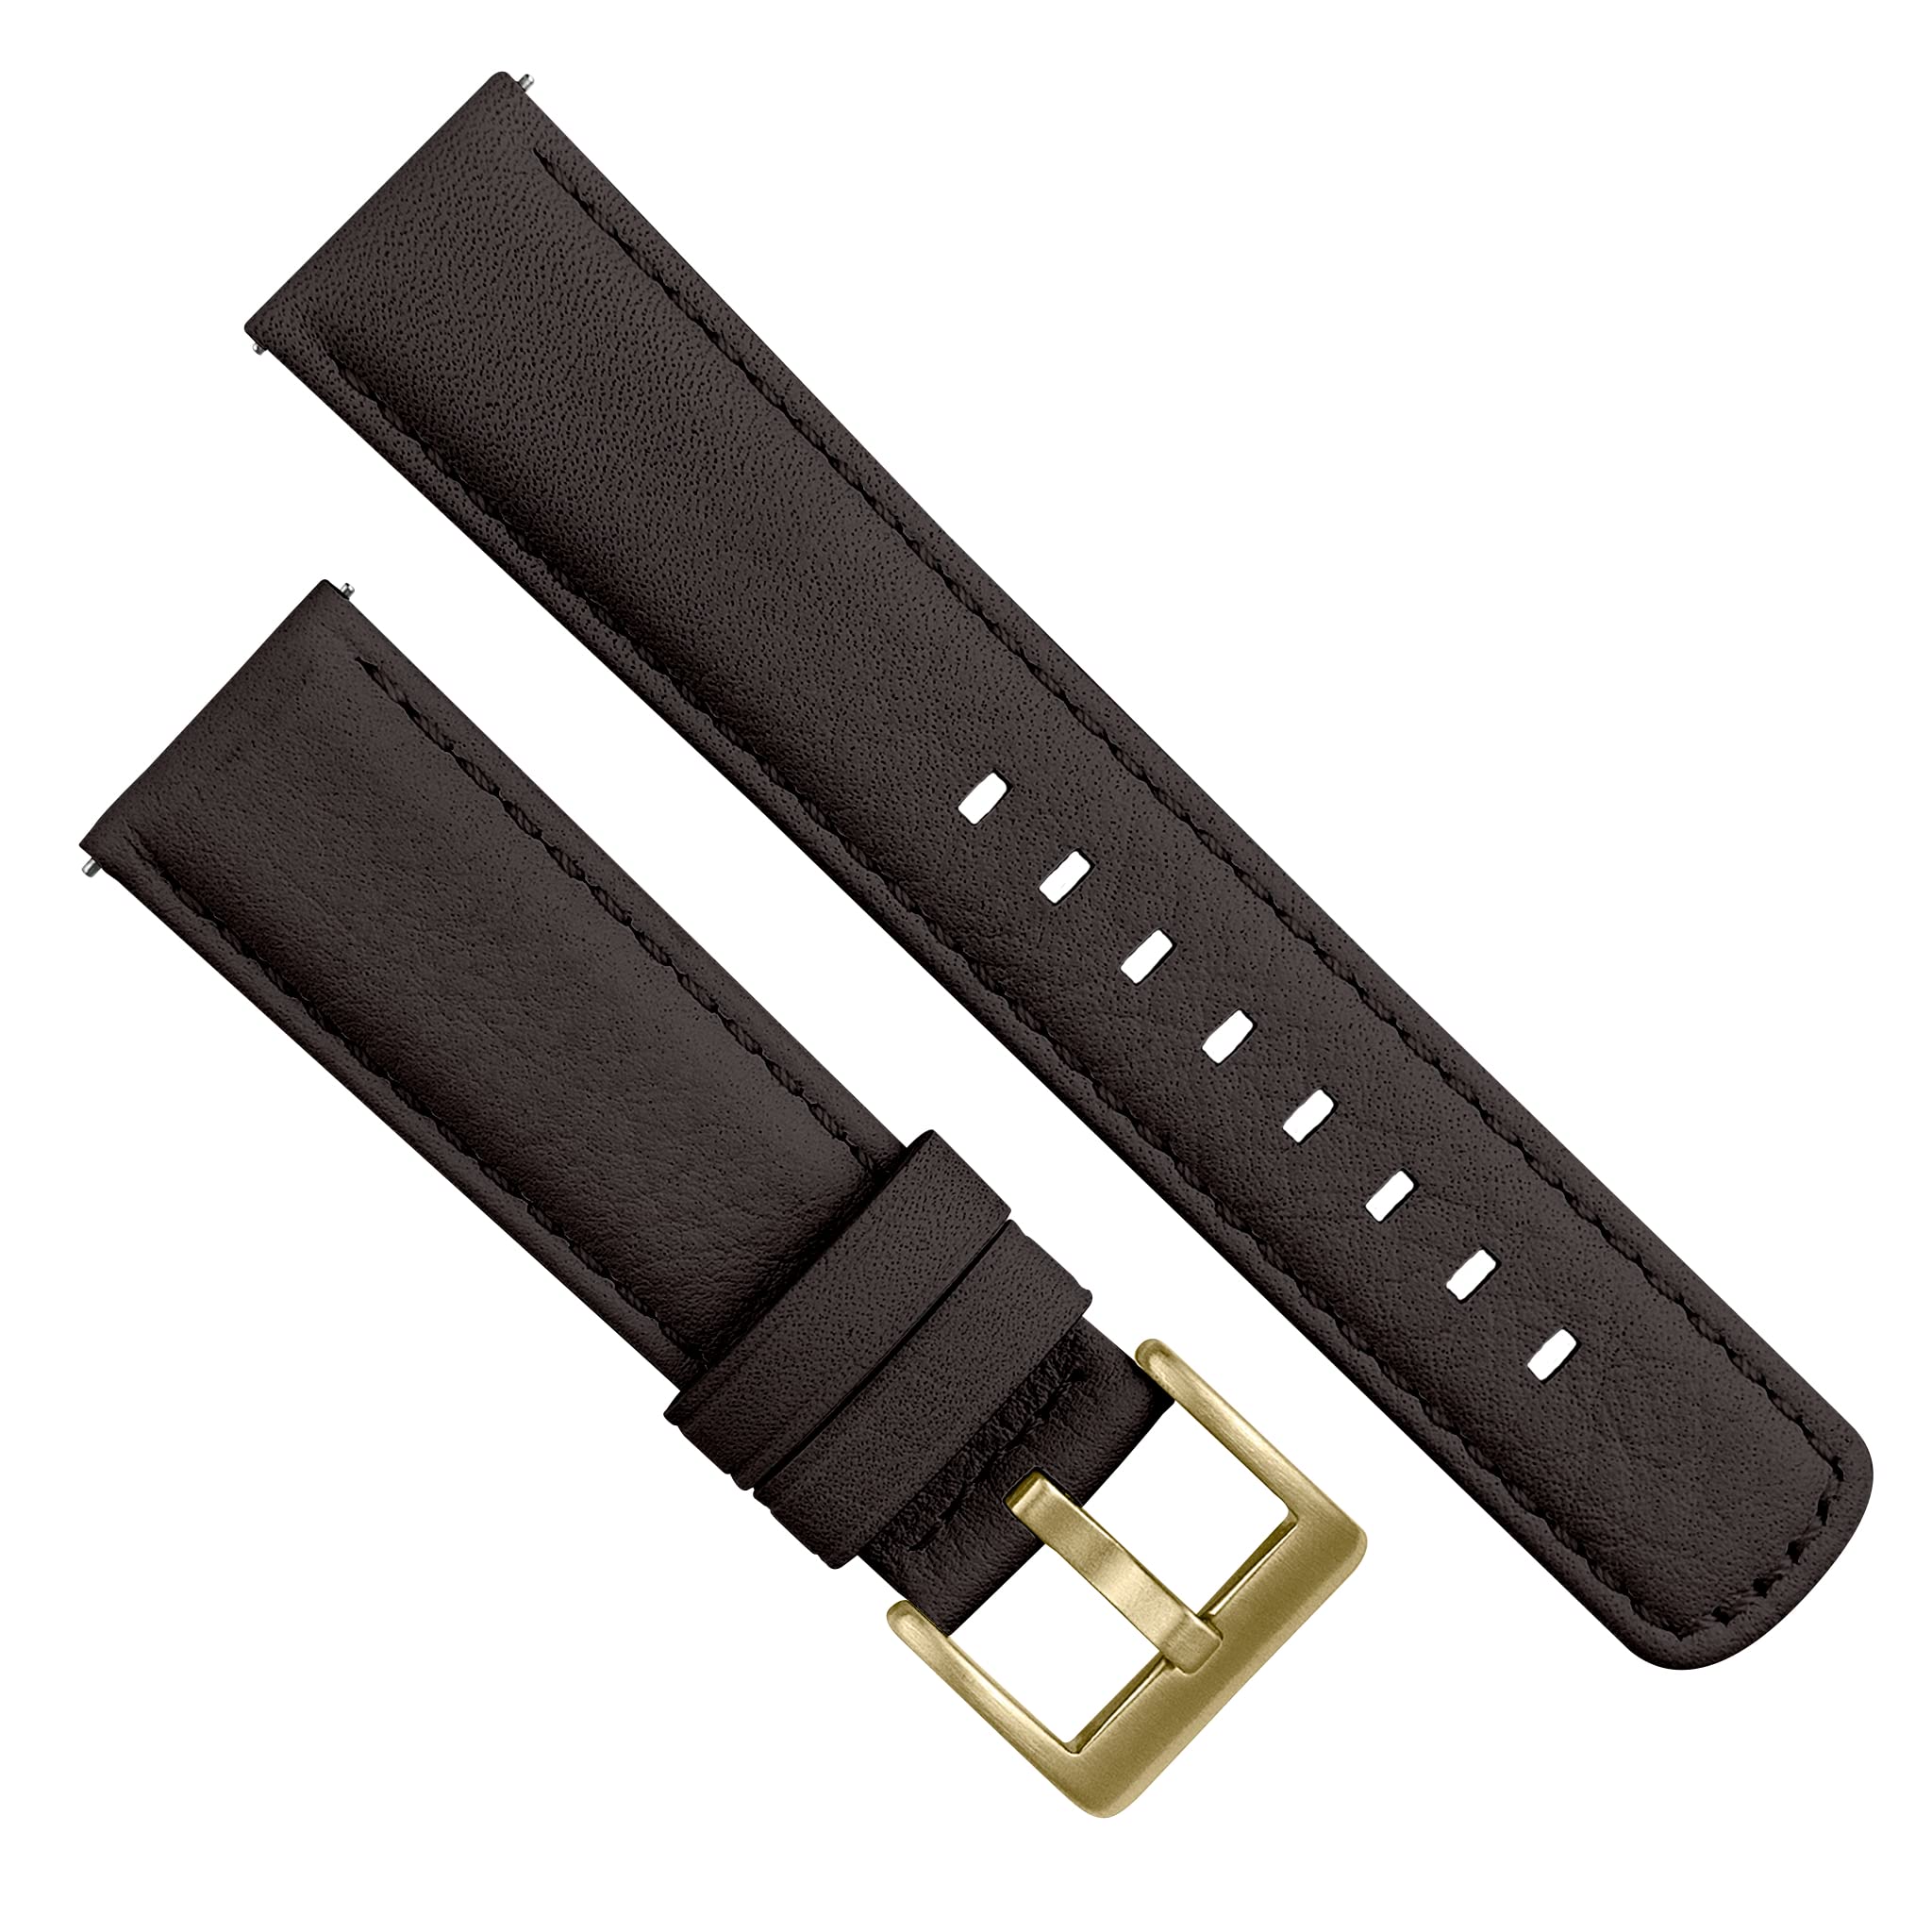 BARTON Water-Resistant Leather Watch Bands - Quick Release - Choose Strap Color & Size - 18mm, 20mm, 22mm & 24mm Watch Straps